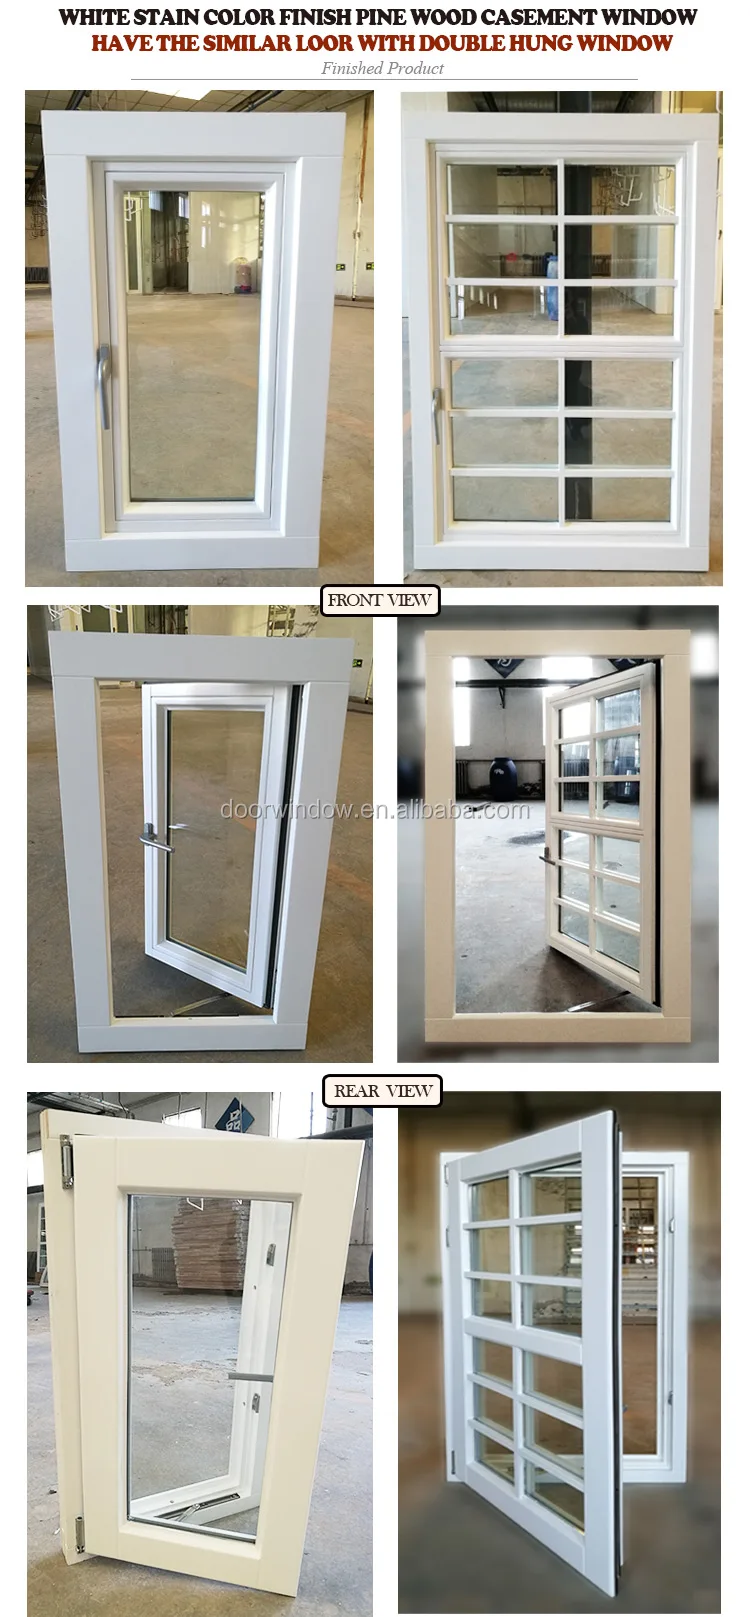 Large high quality top hung window with chemically toughened glass